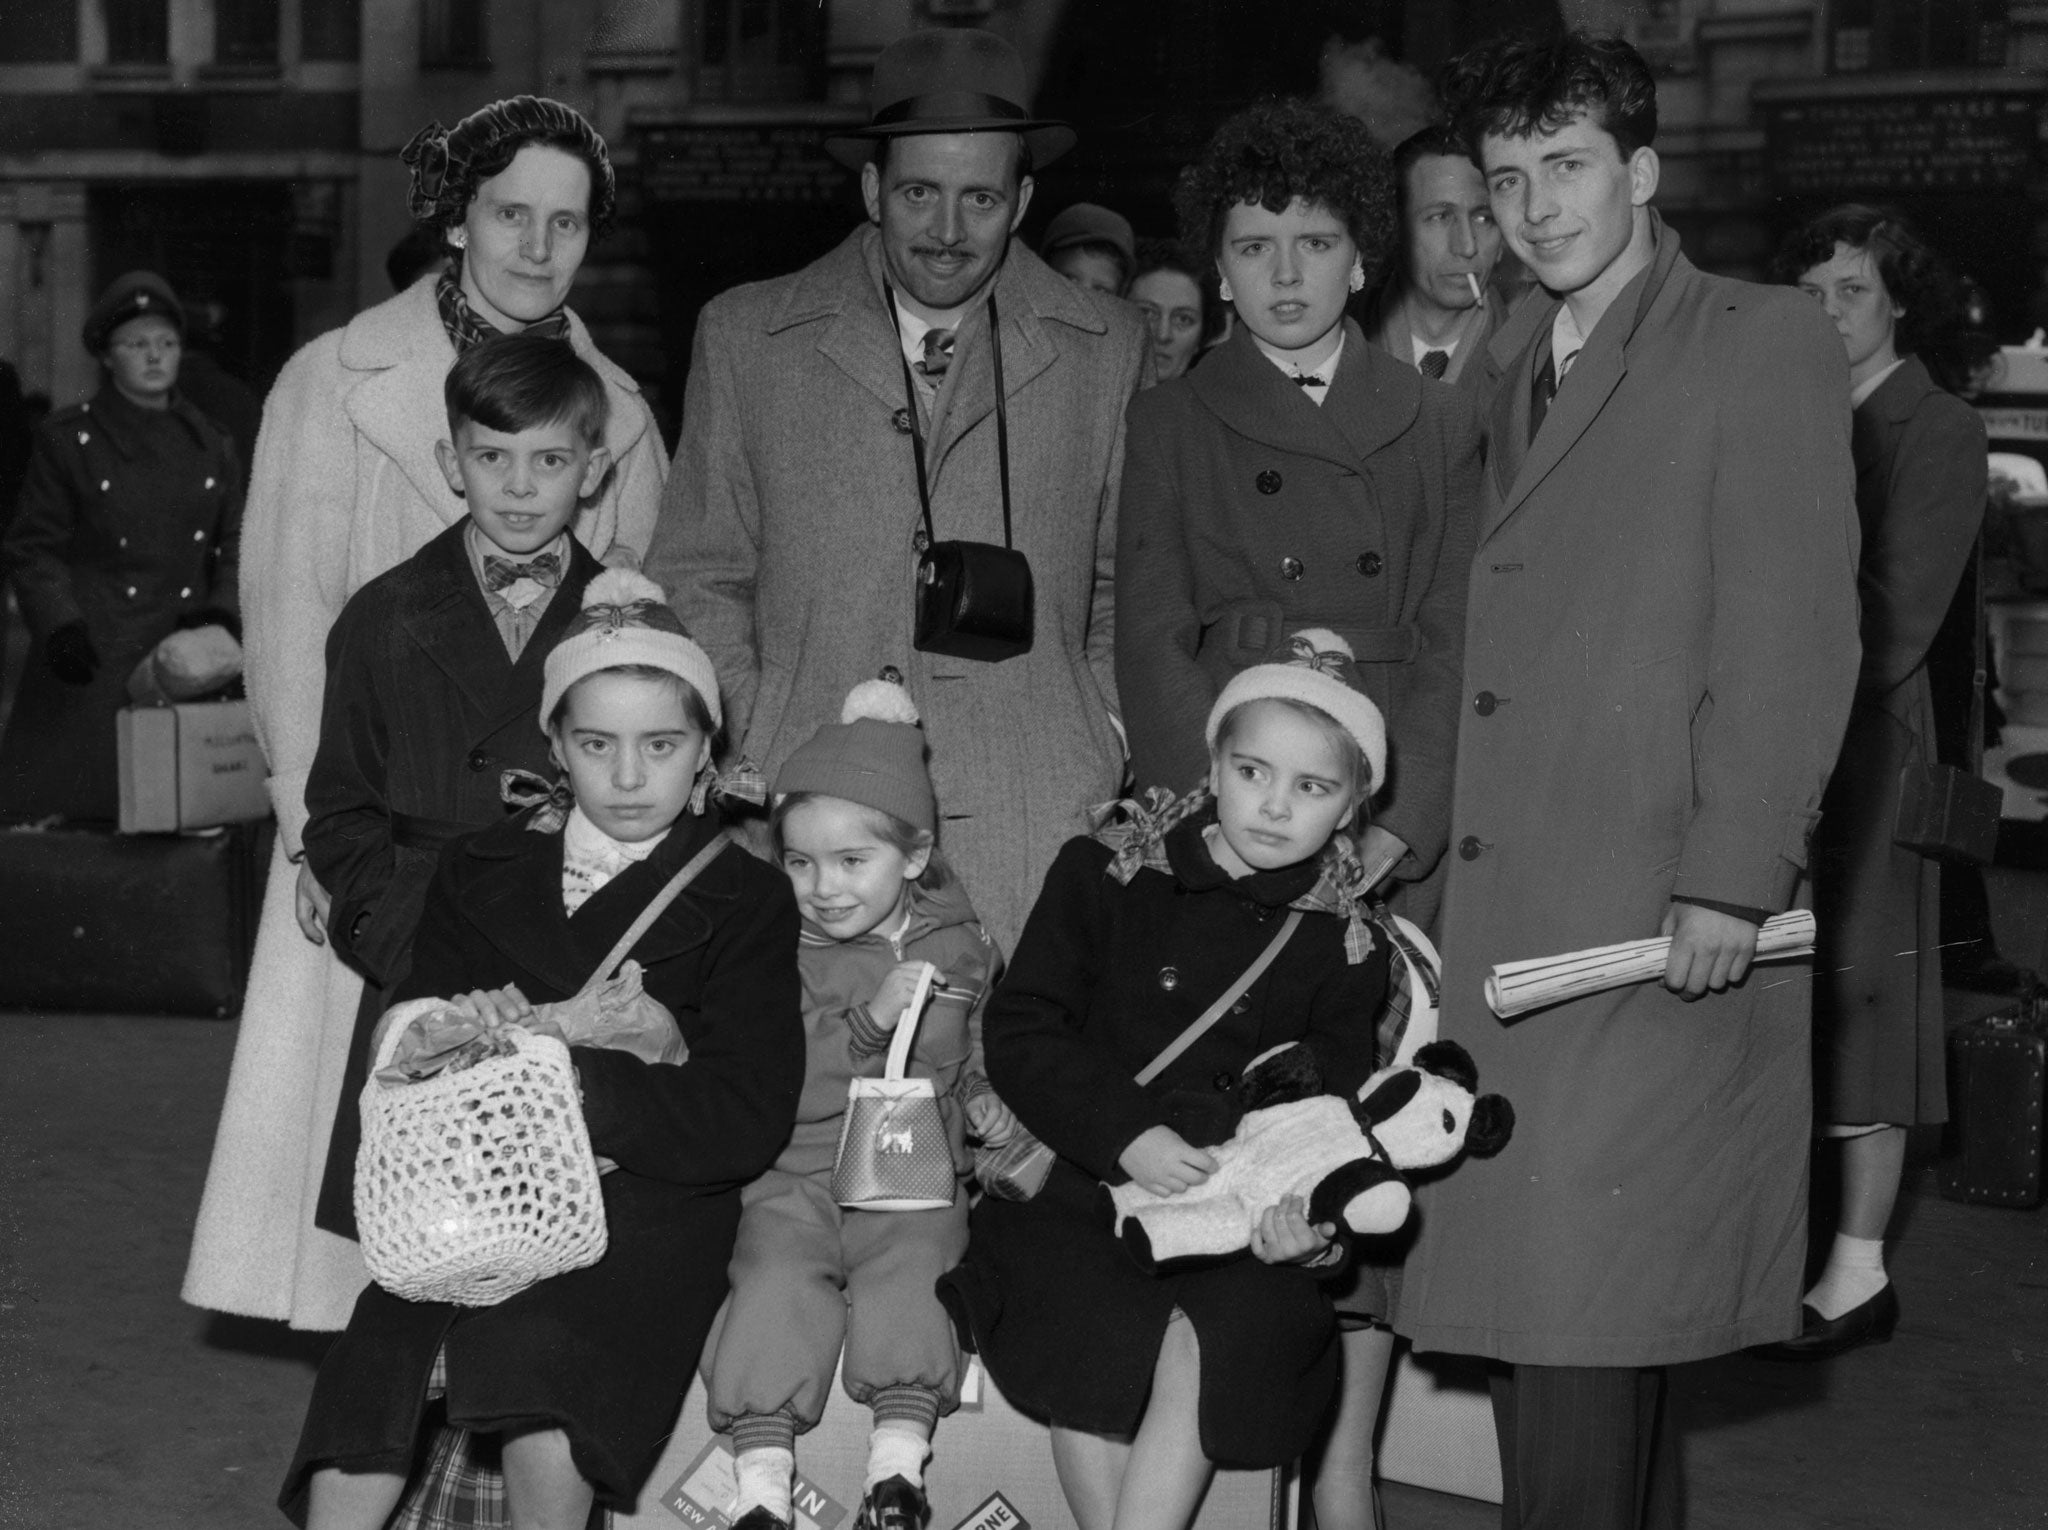 20th April 1955: The Igoe family from Edinburgh waiting for their train at London's Waterloo Station, en route to a new life in Melbourne. They are amongst the 2,600 British citizens who are being given aid to emigrate to Australia in the next two days.